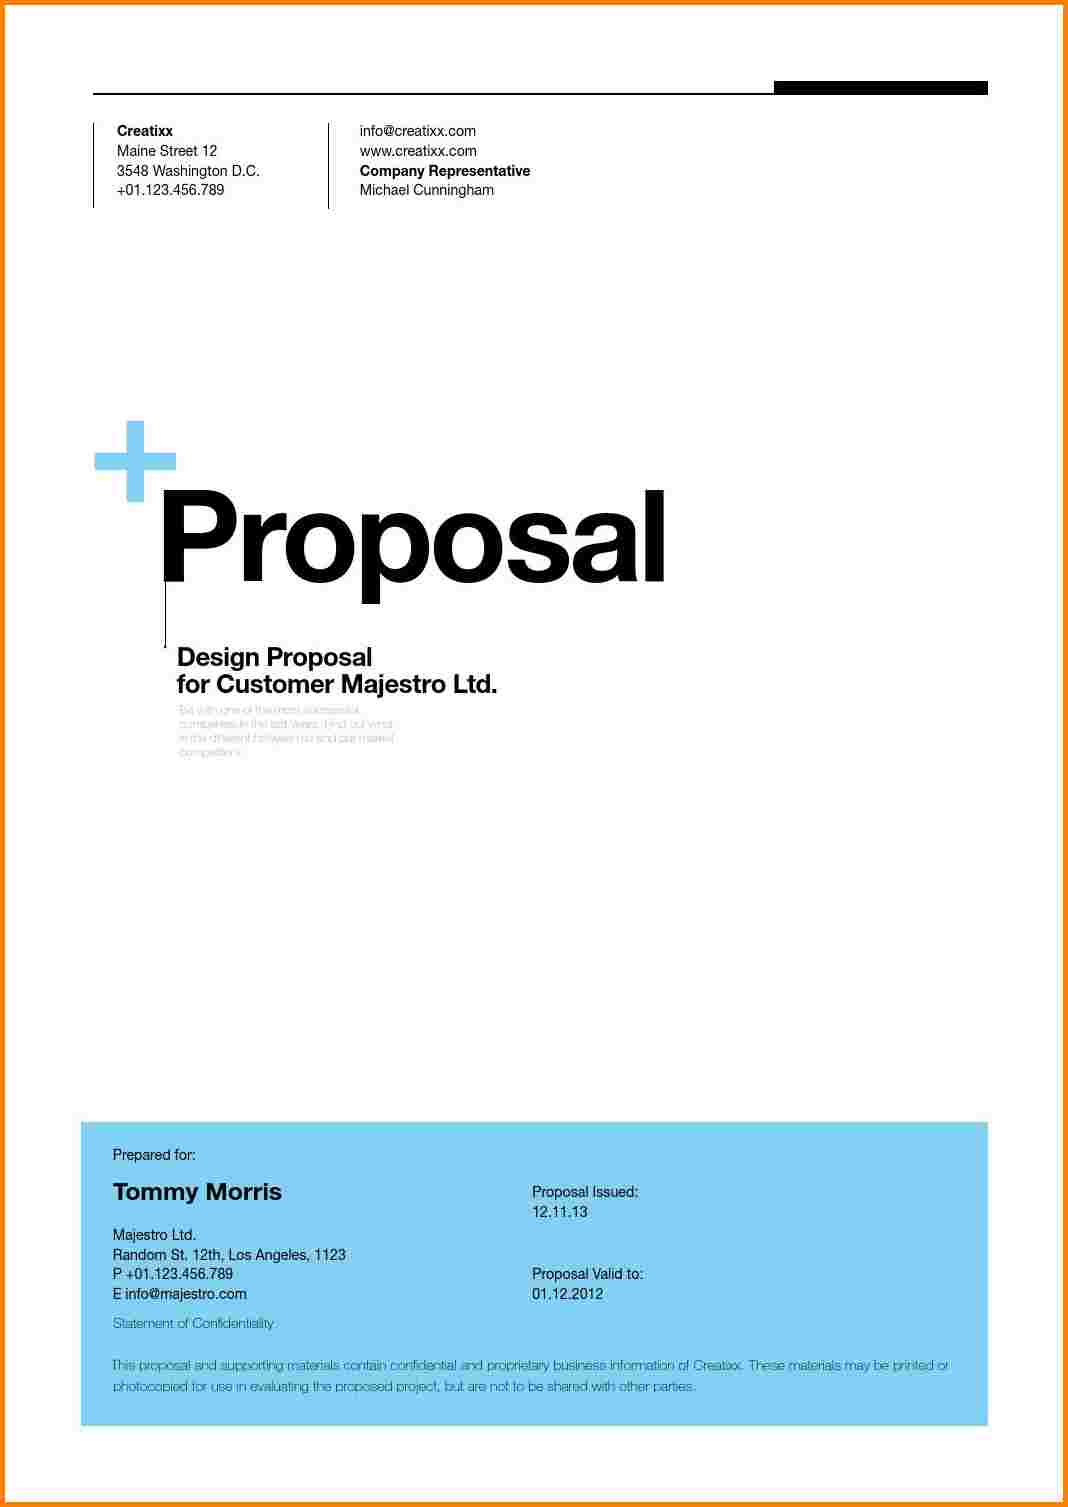 cover page of proposal Romeo.landinez.co